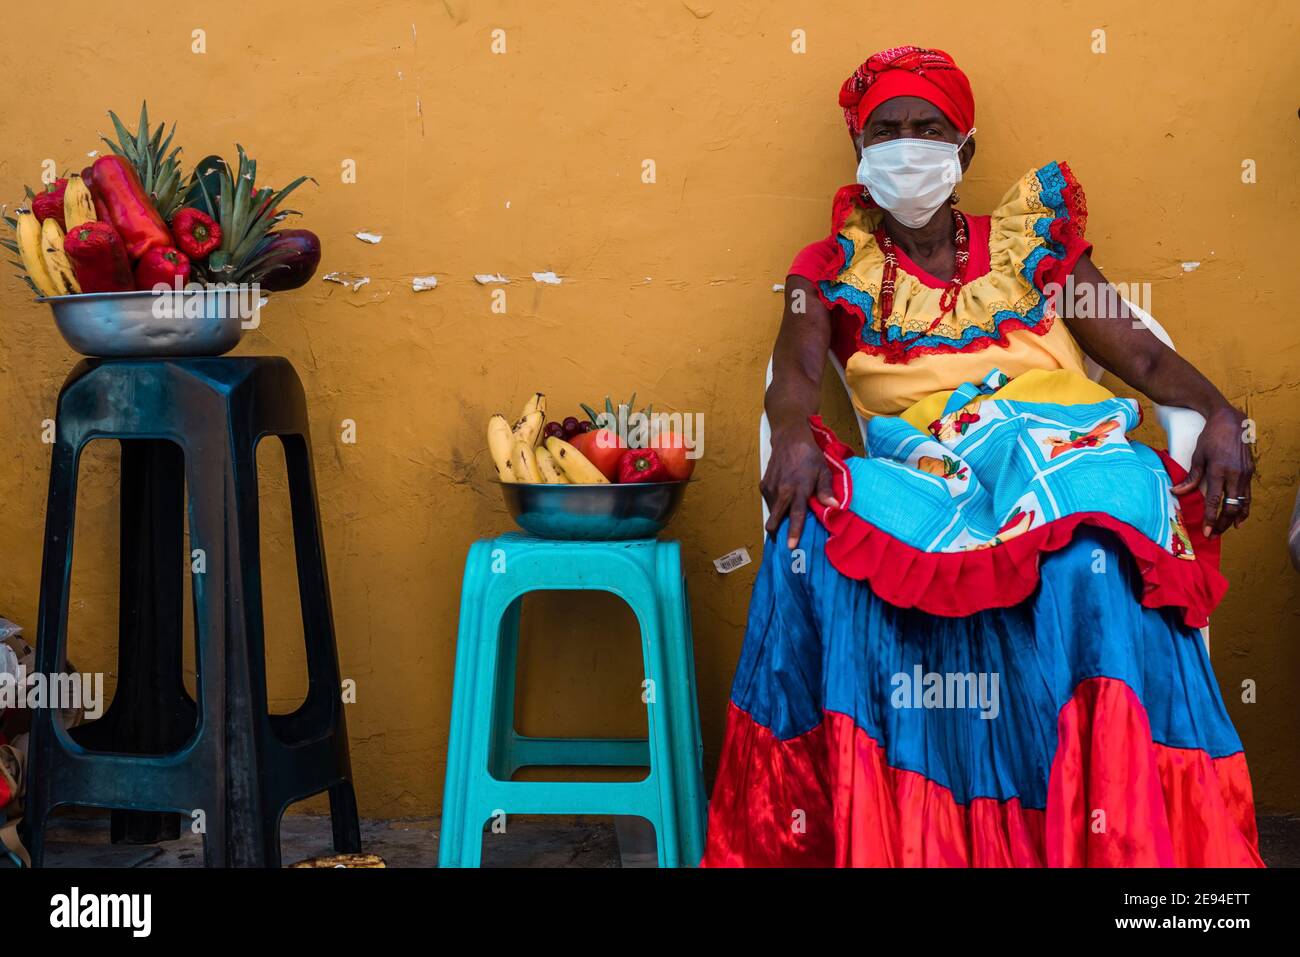 Cartagena, Colombia, February 2021: Women fruit vendors fruits sellers named Palenquera wearing face mask during the Pandemic COVID 19. Visit Columbia Stock Photo